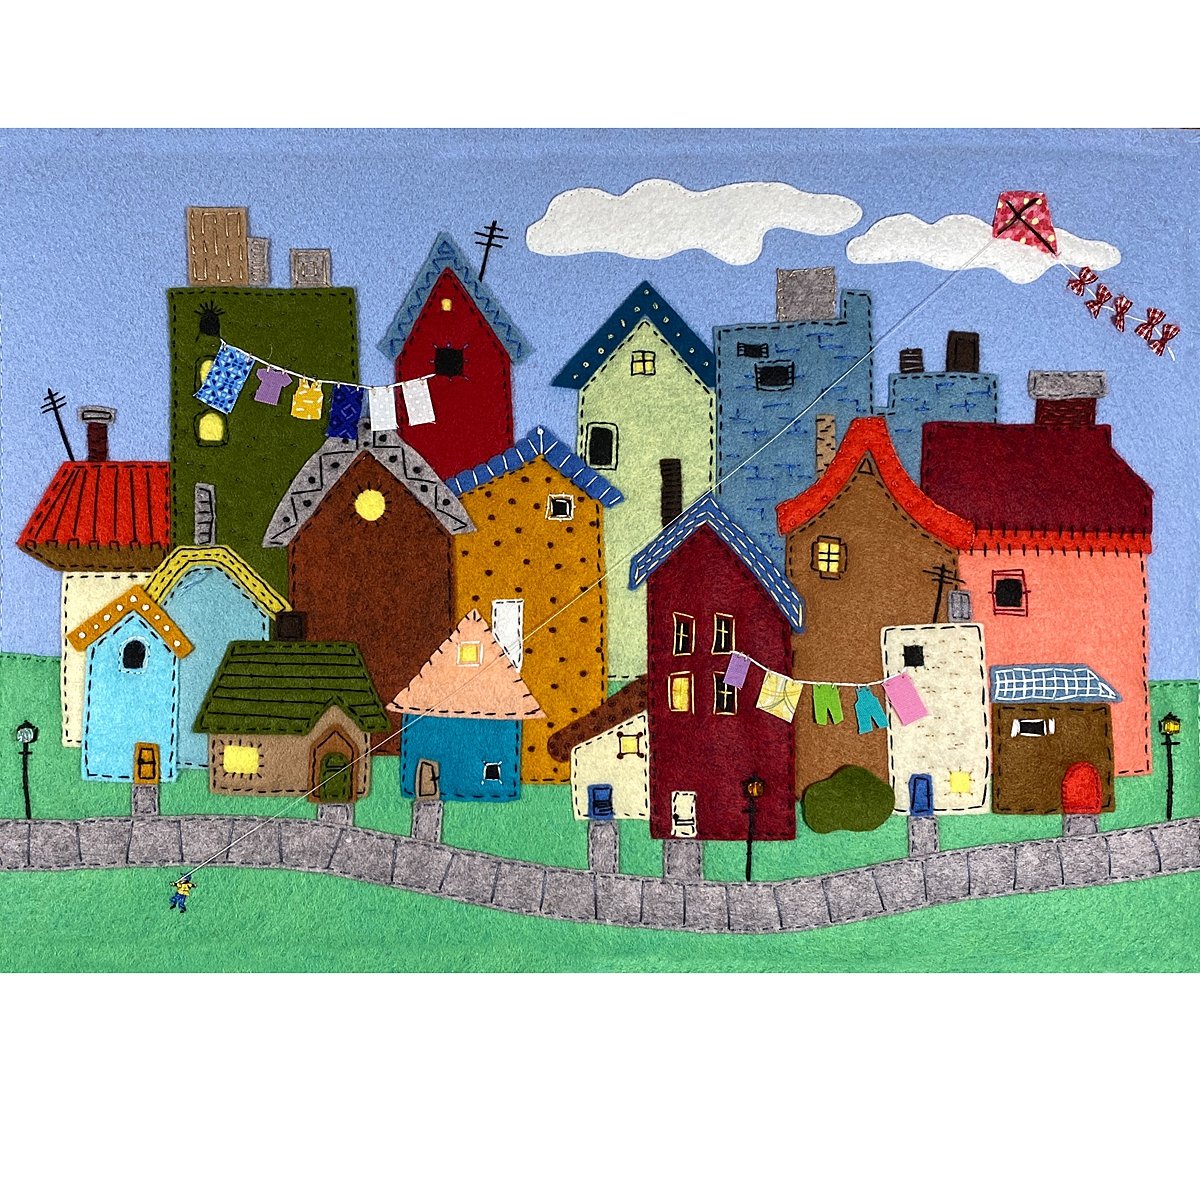 Tiny Town Felt Appliqué Wall Art Pattern #FP014 - Tulip Square ~ Patterns  for useful quilted goods